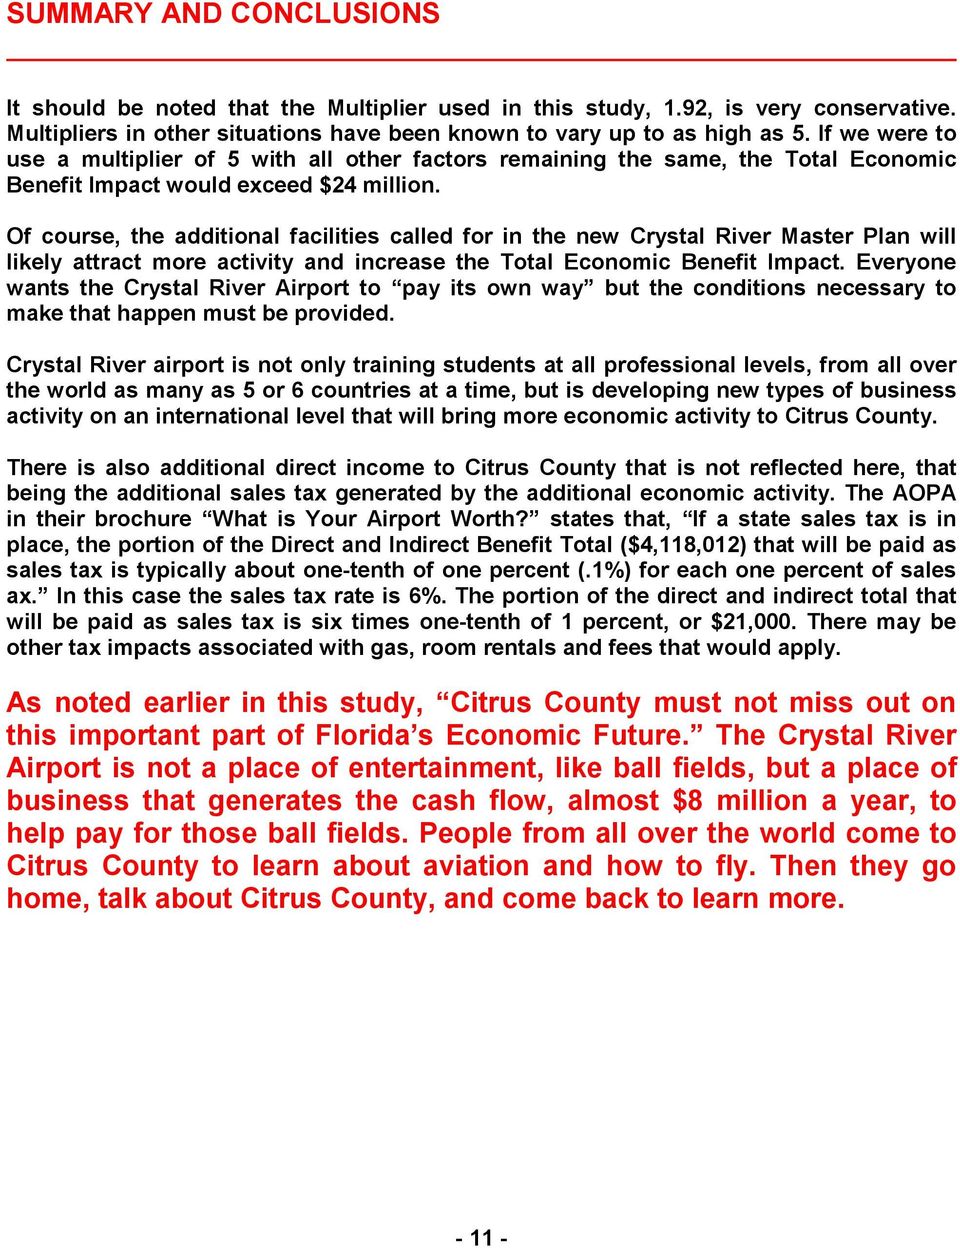 Of course, the additional facilities called for in the new Crystal River Master Plan will likely attract more activity and increase the Total Economic Benefit Impact.